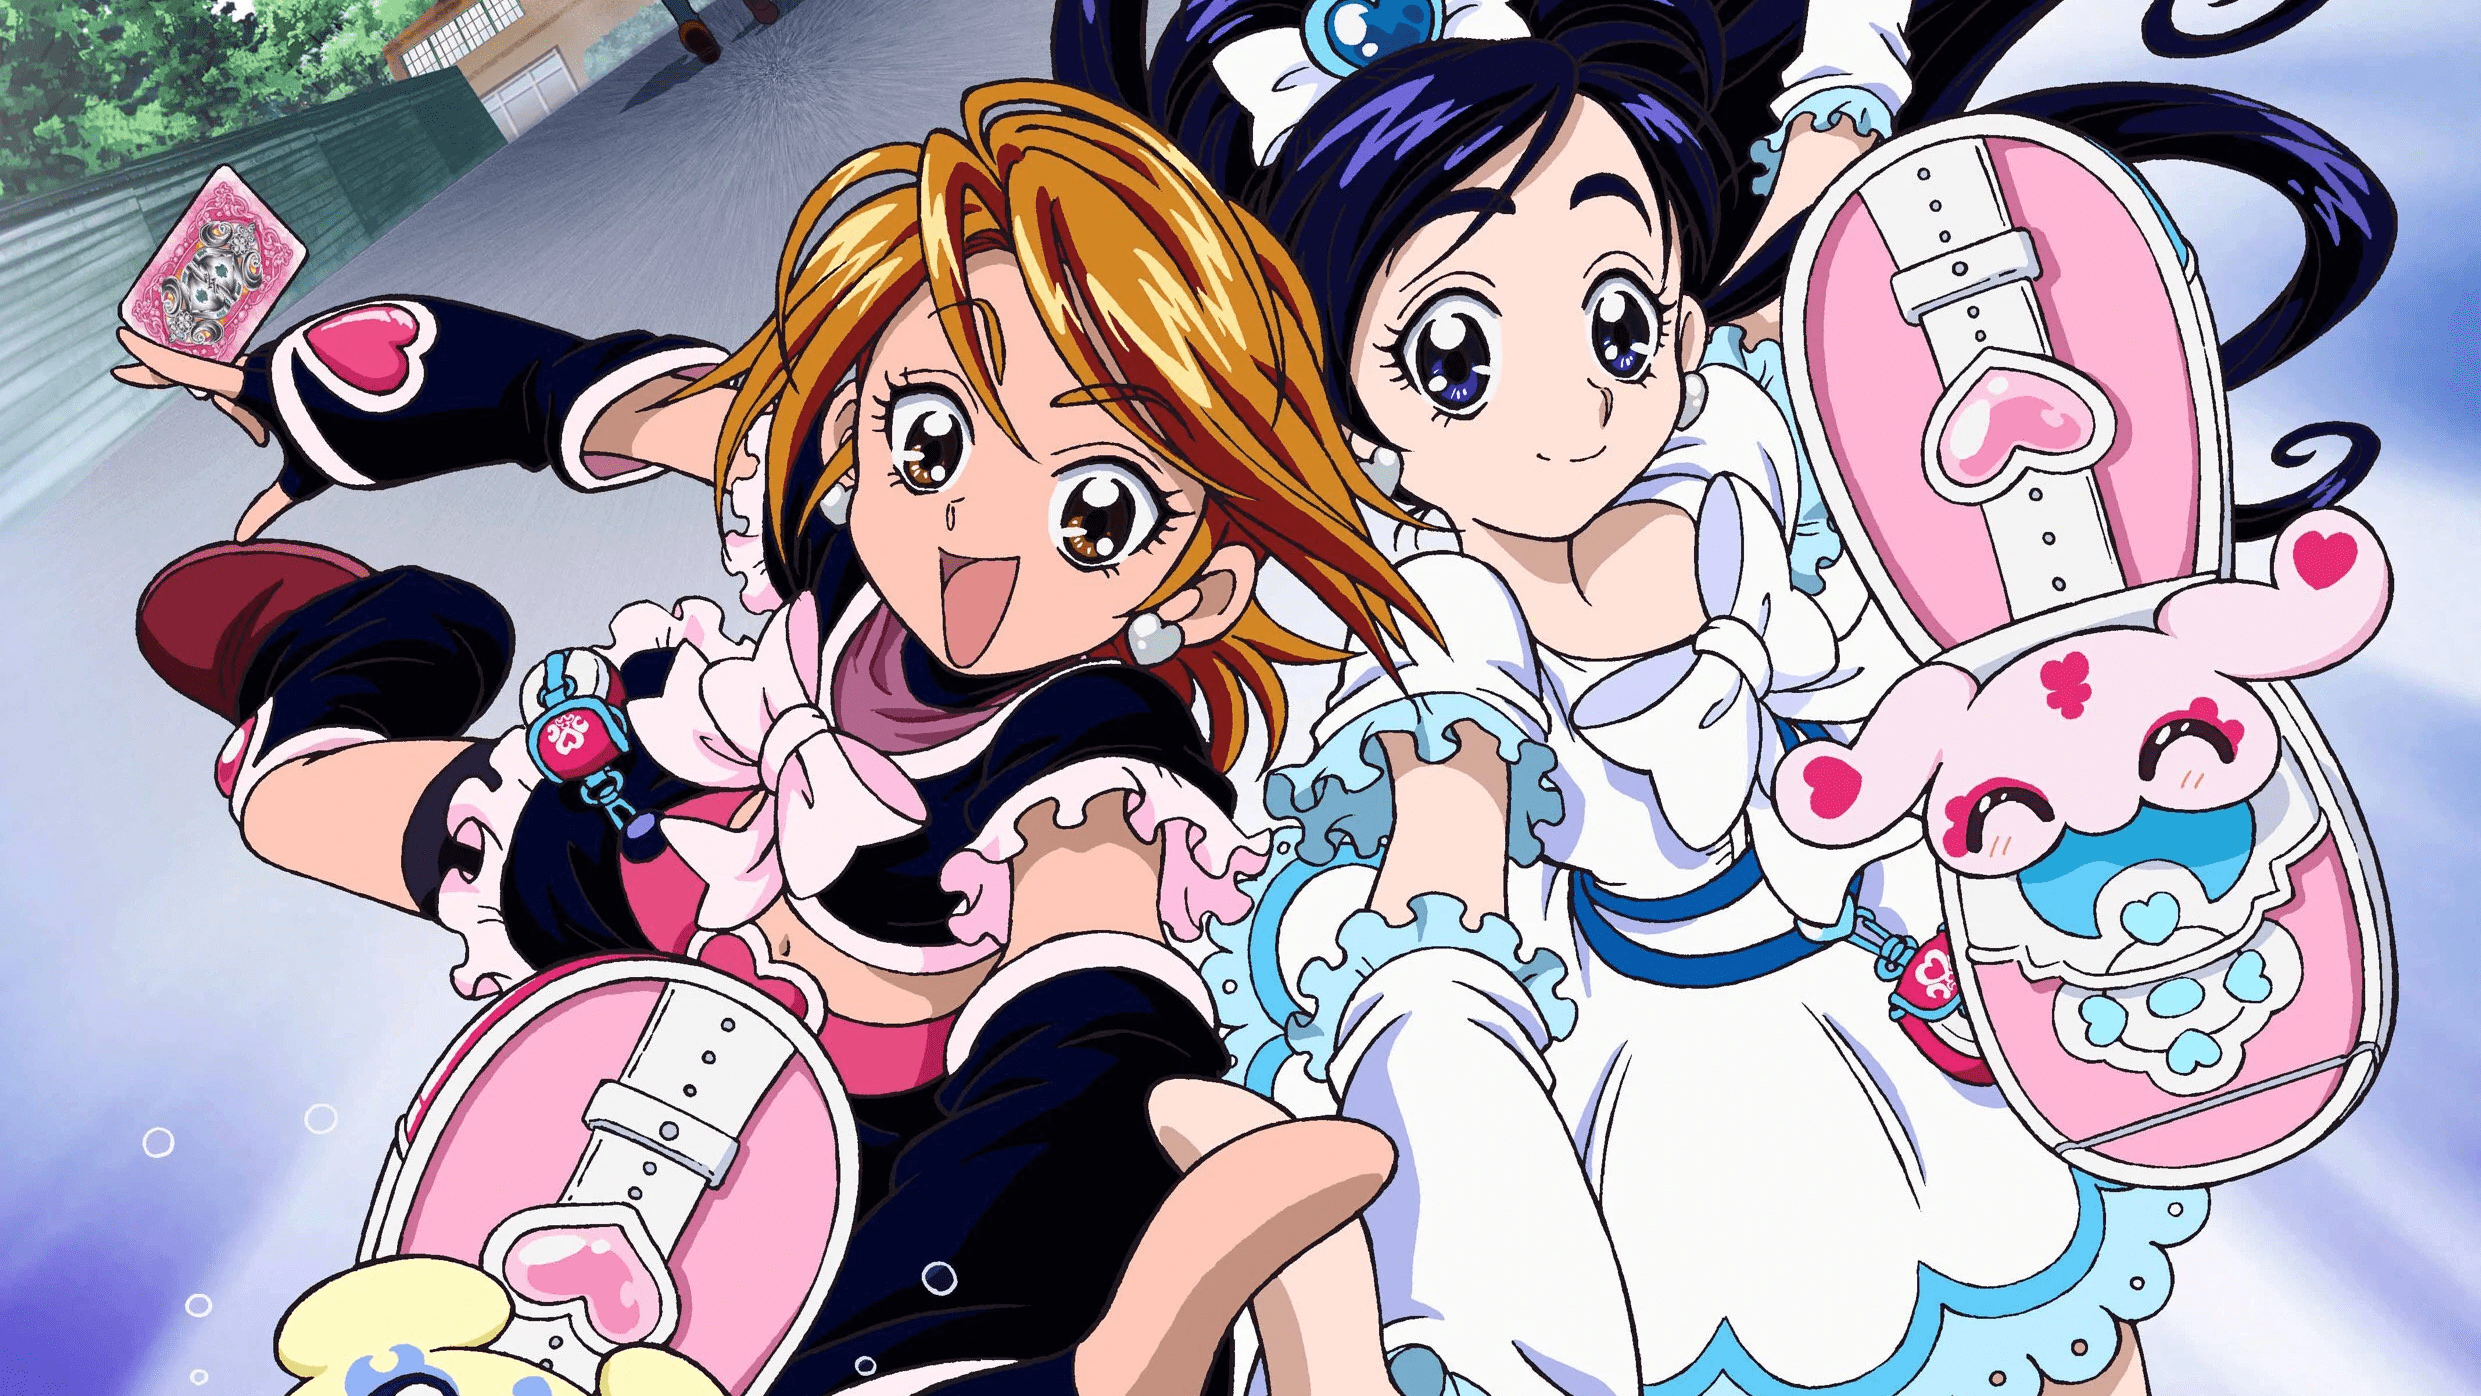 PreCure turns 20 this year!